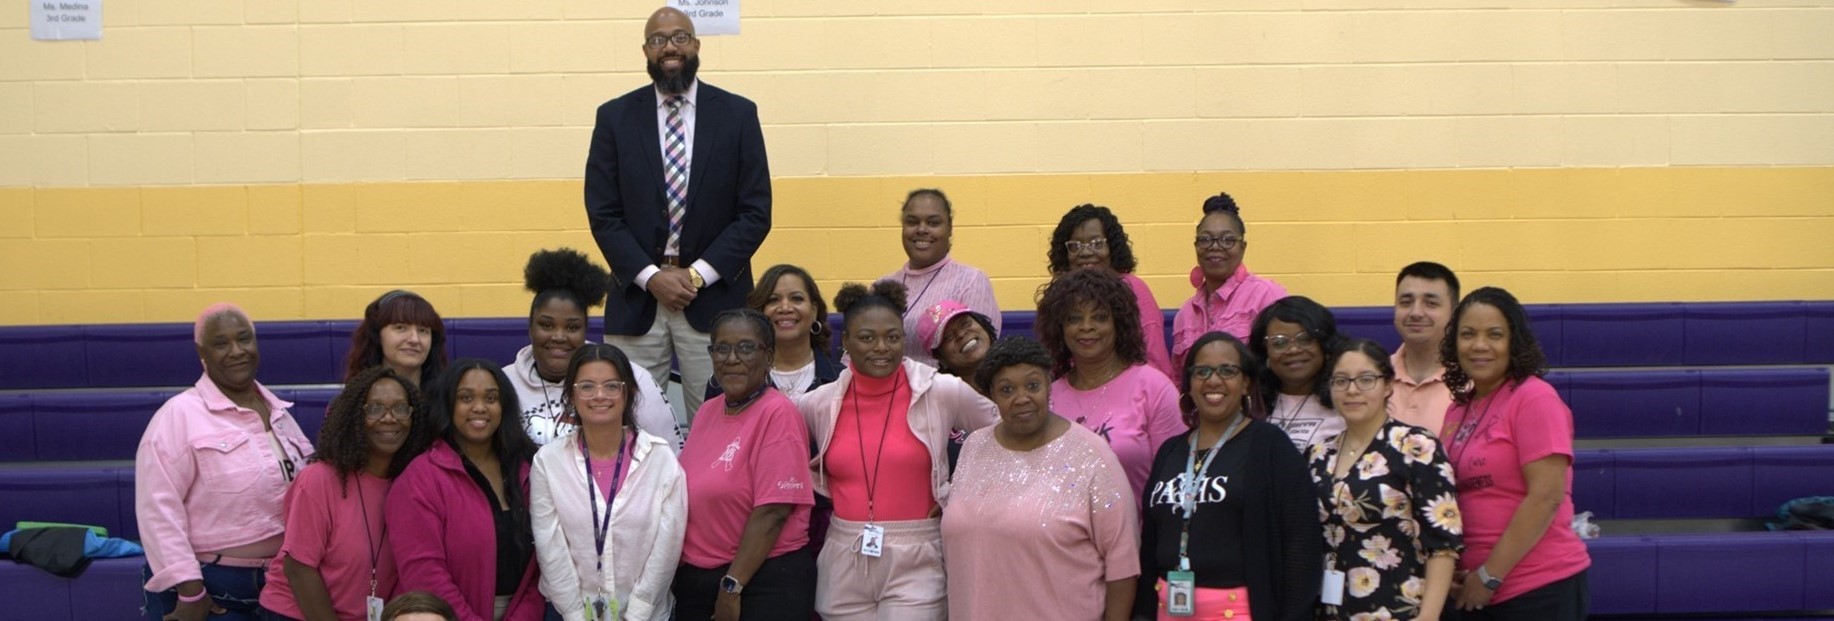 Staff wears pink in honor of Breast Cancer Awareness Month